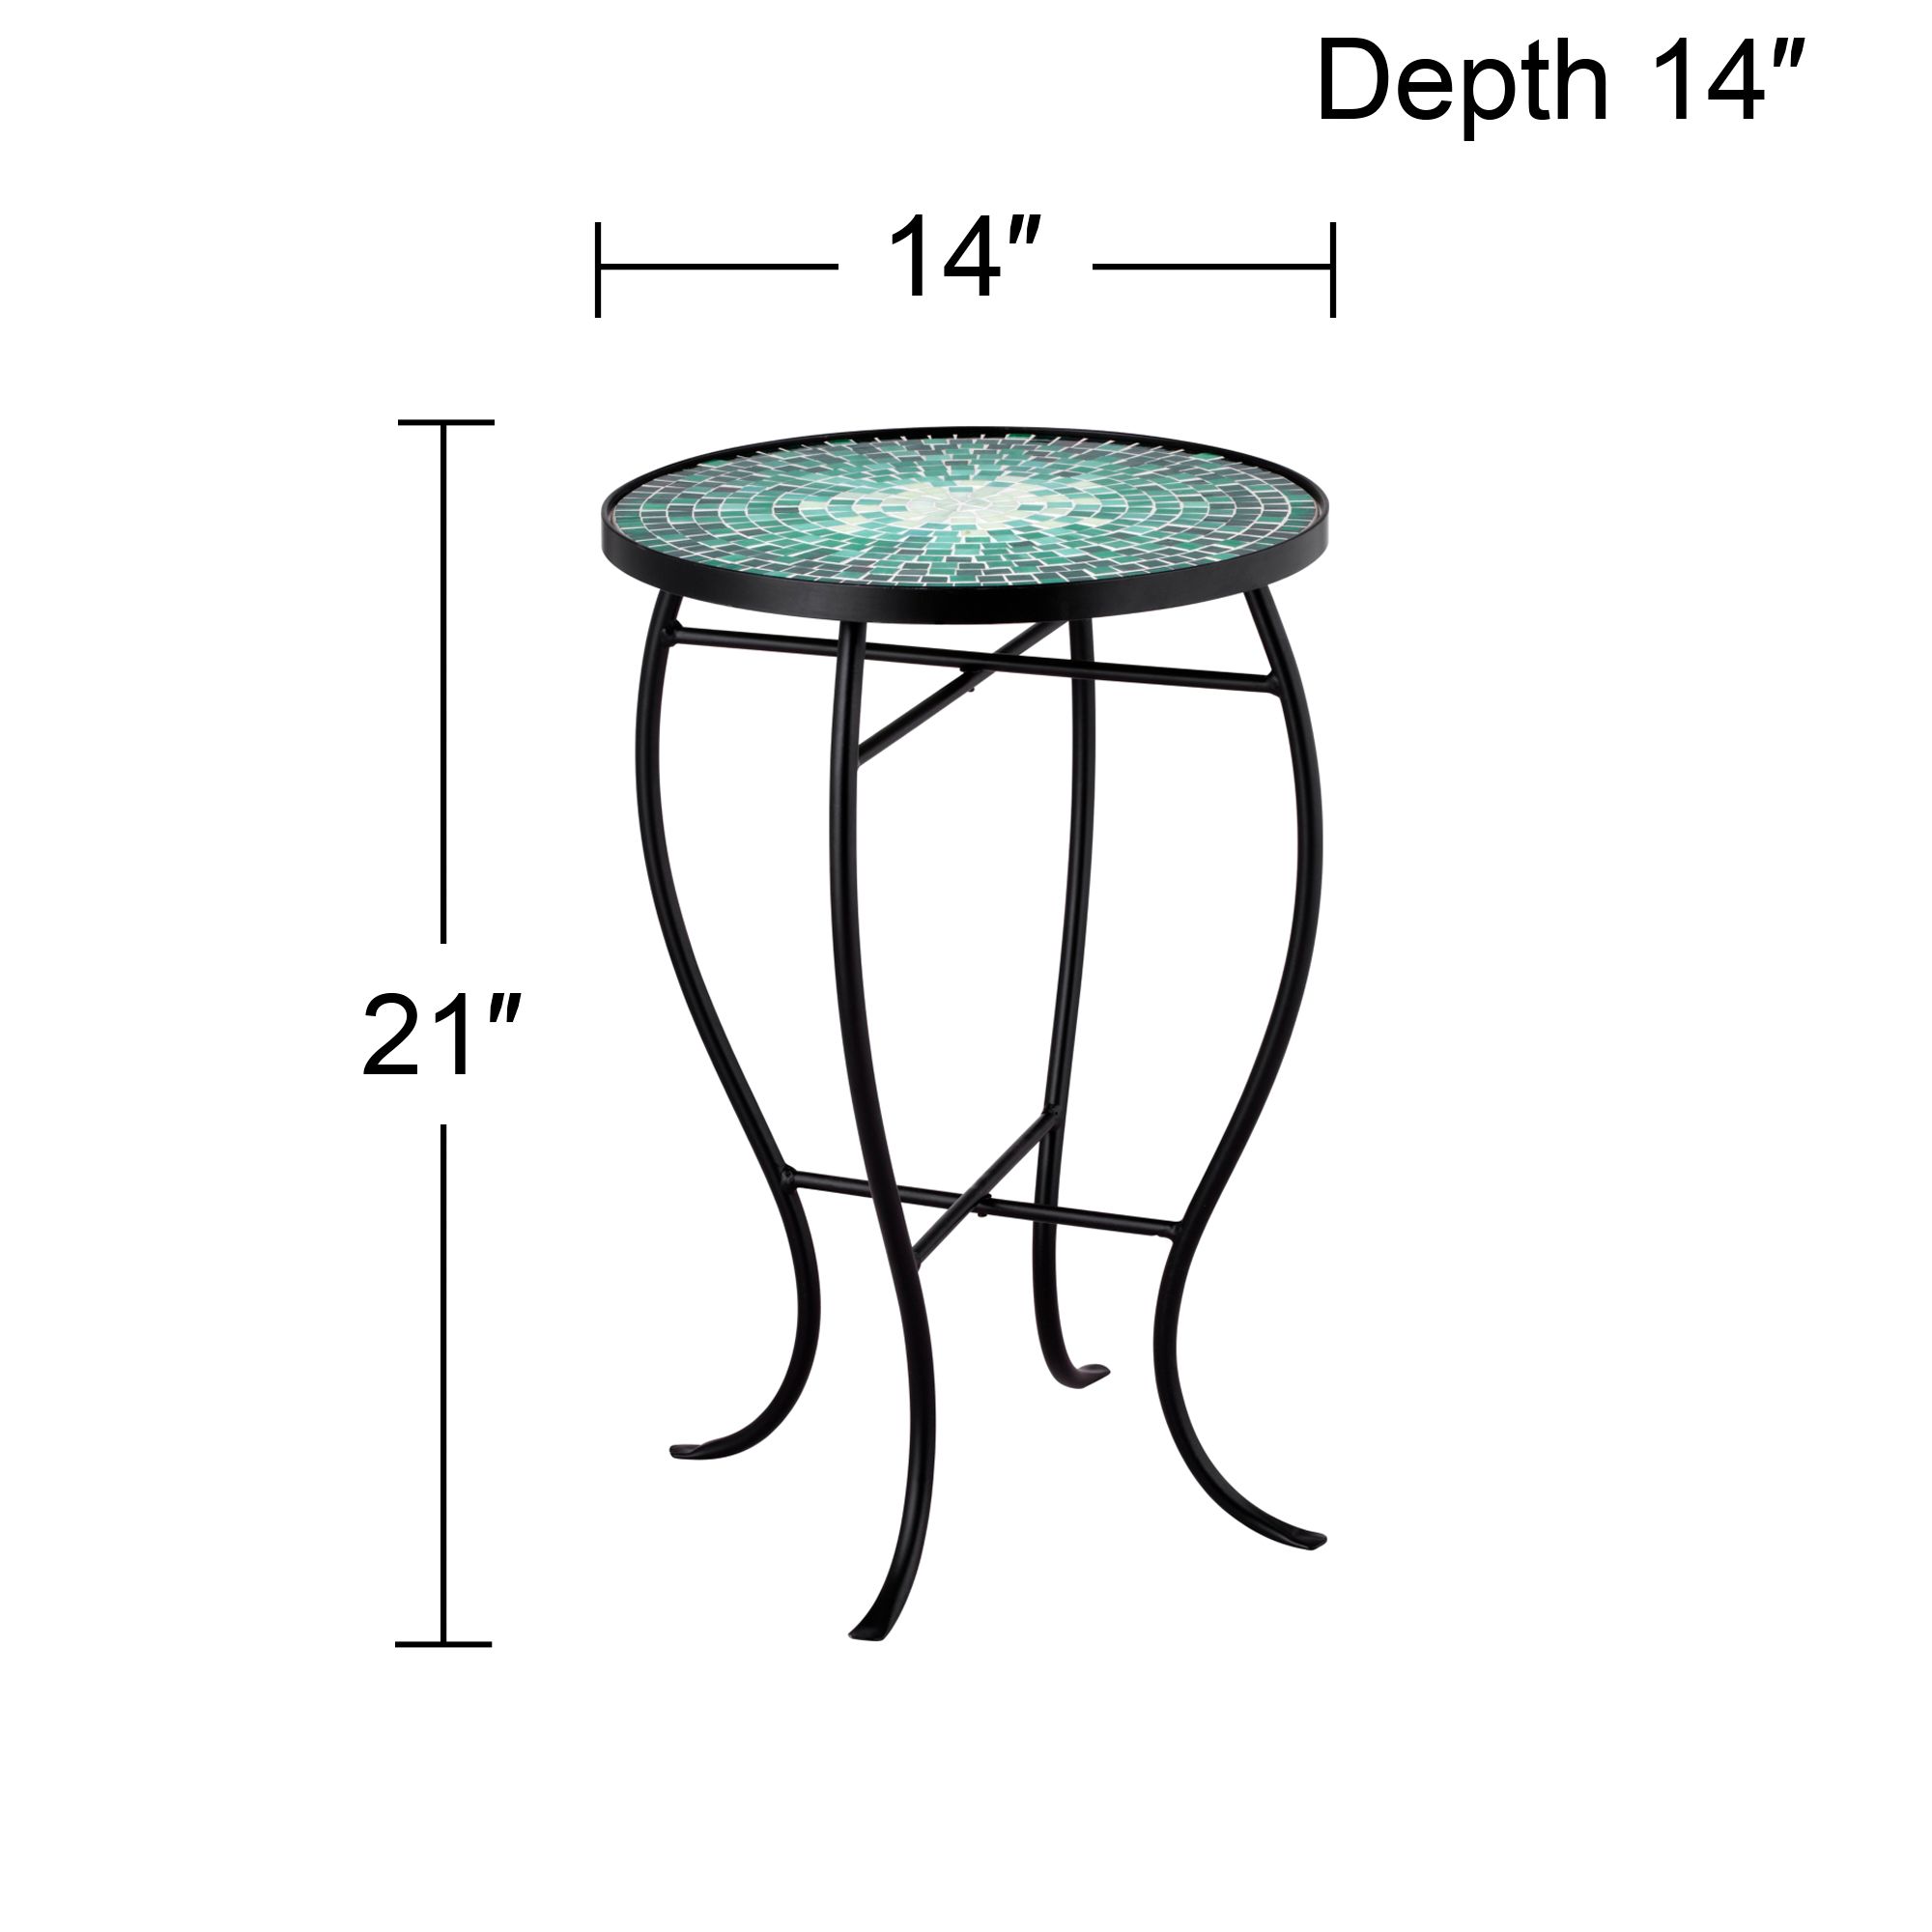 Teal Island Designs Modern Black Round Outdoor Accent Side Table 14" Wide Green Mosaic Front Porch Patio House Balcony Deck Shed - image 4 of 7